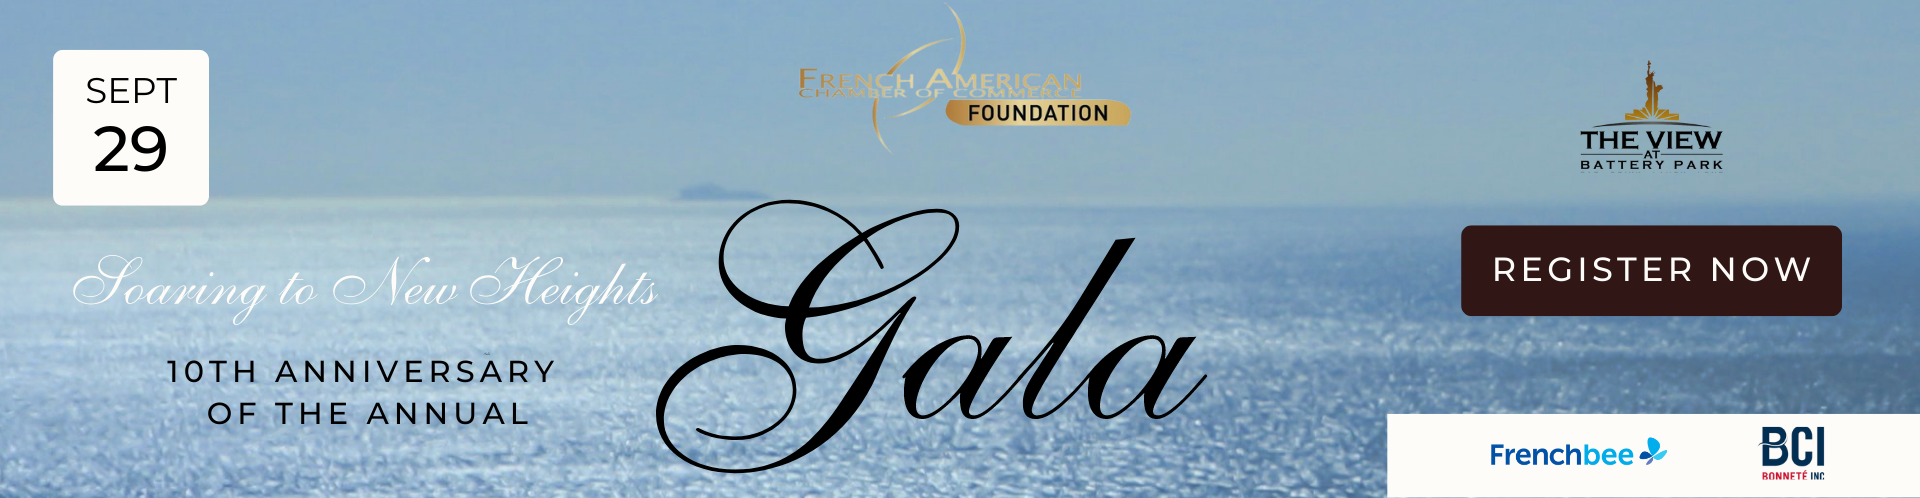 FACC_gala_2022_banner.png